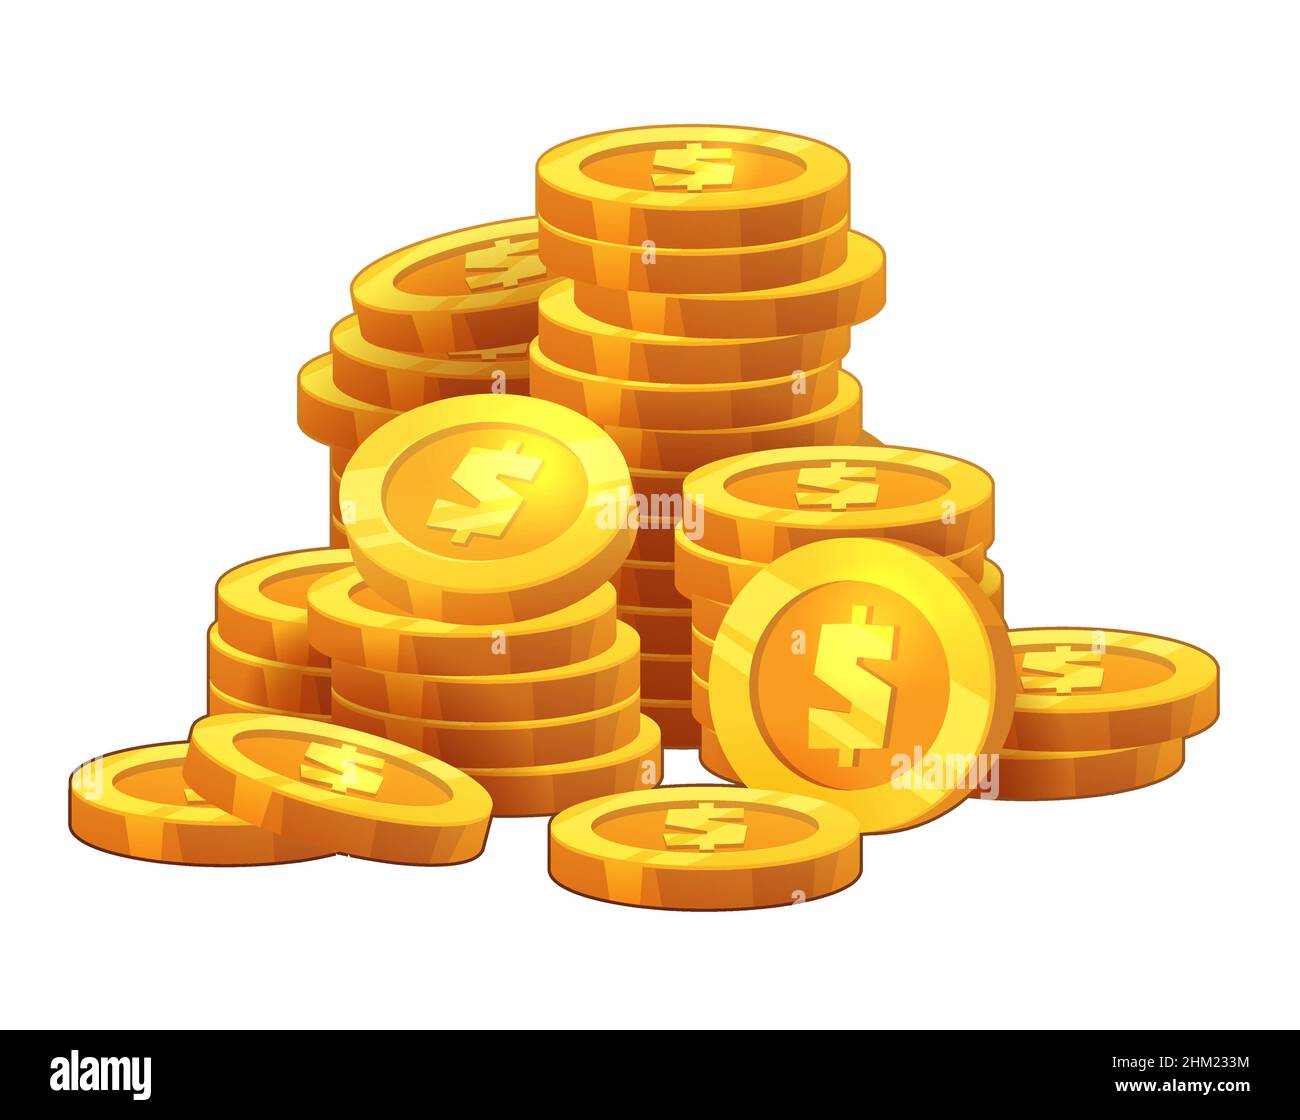 Vector cartoon style illustration of coins stack Stock Vector